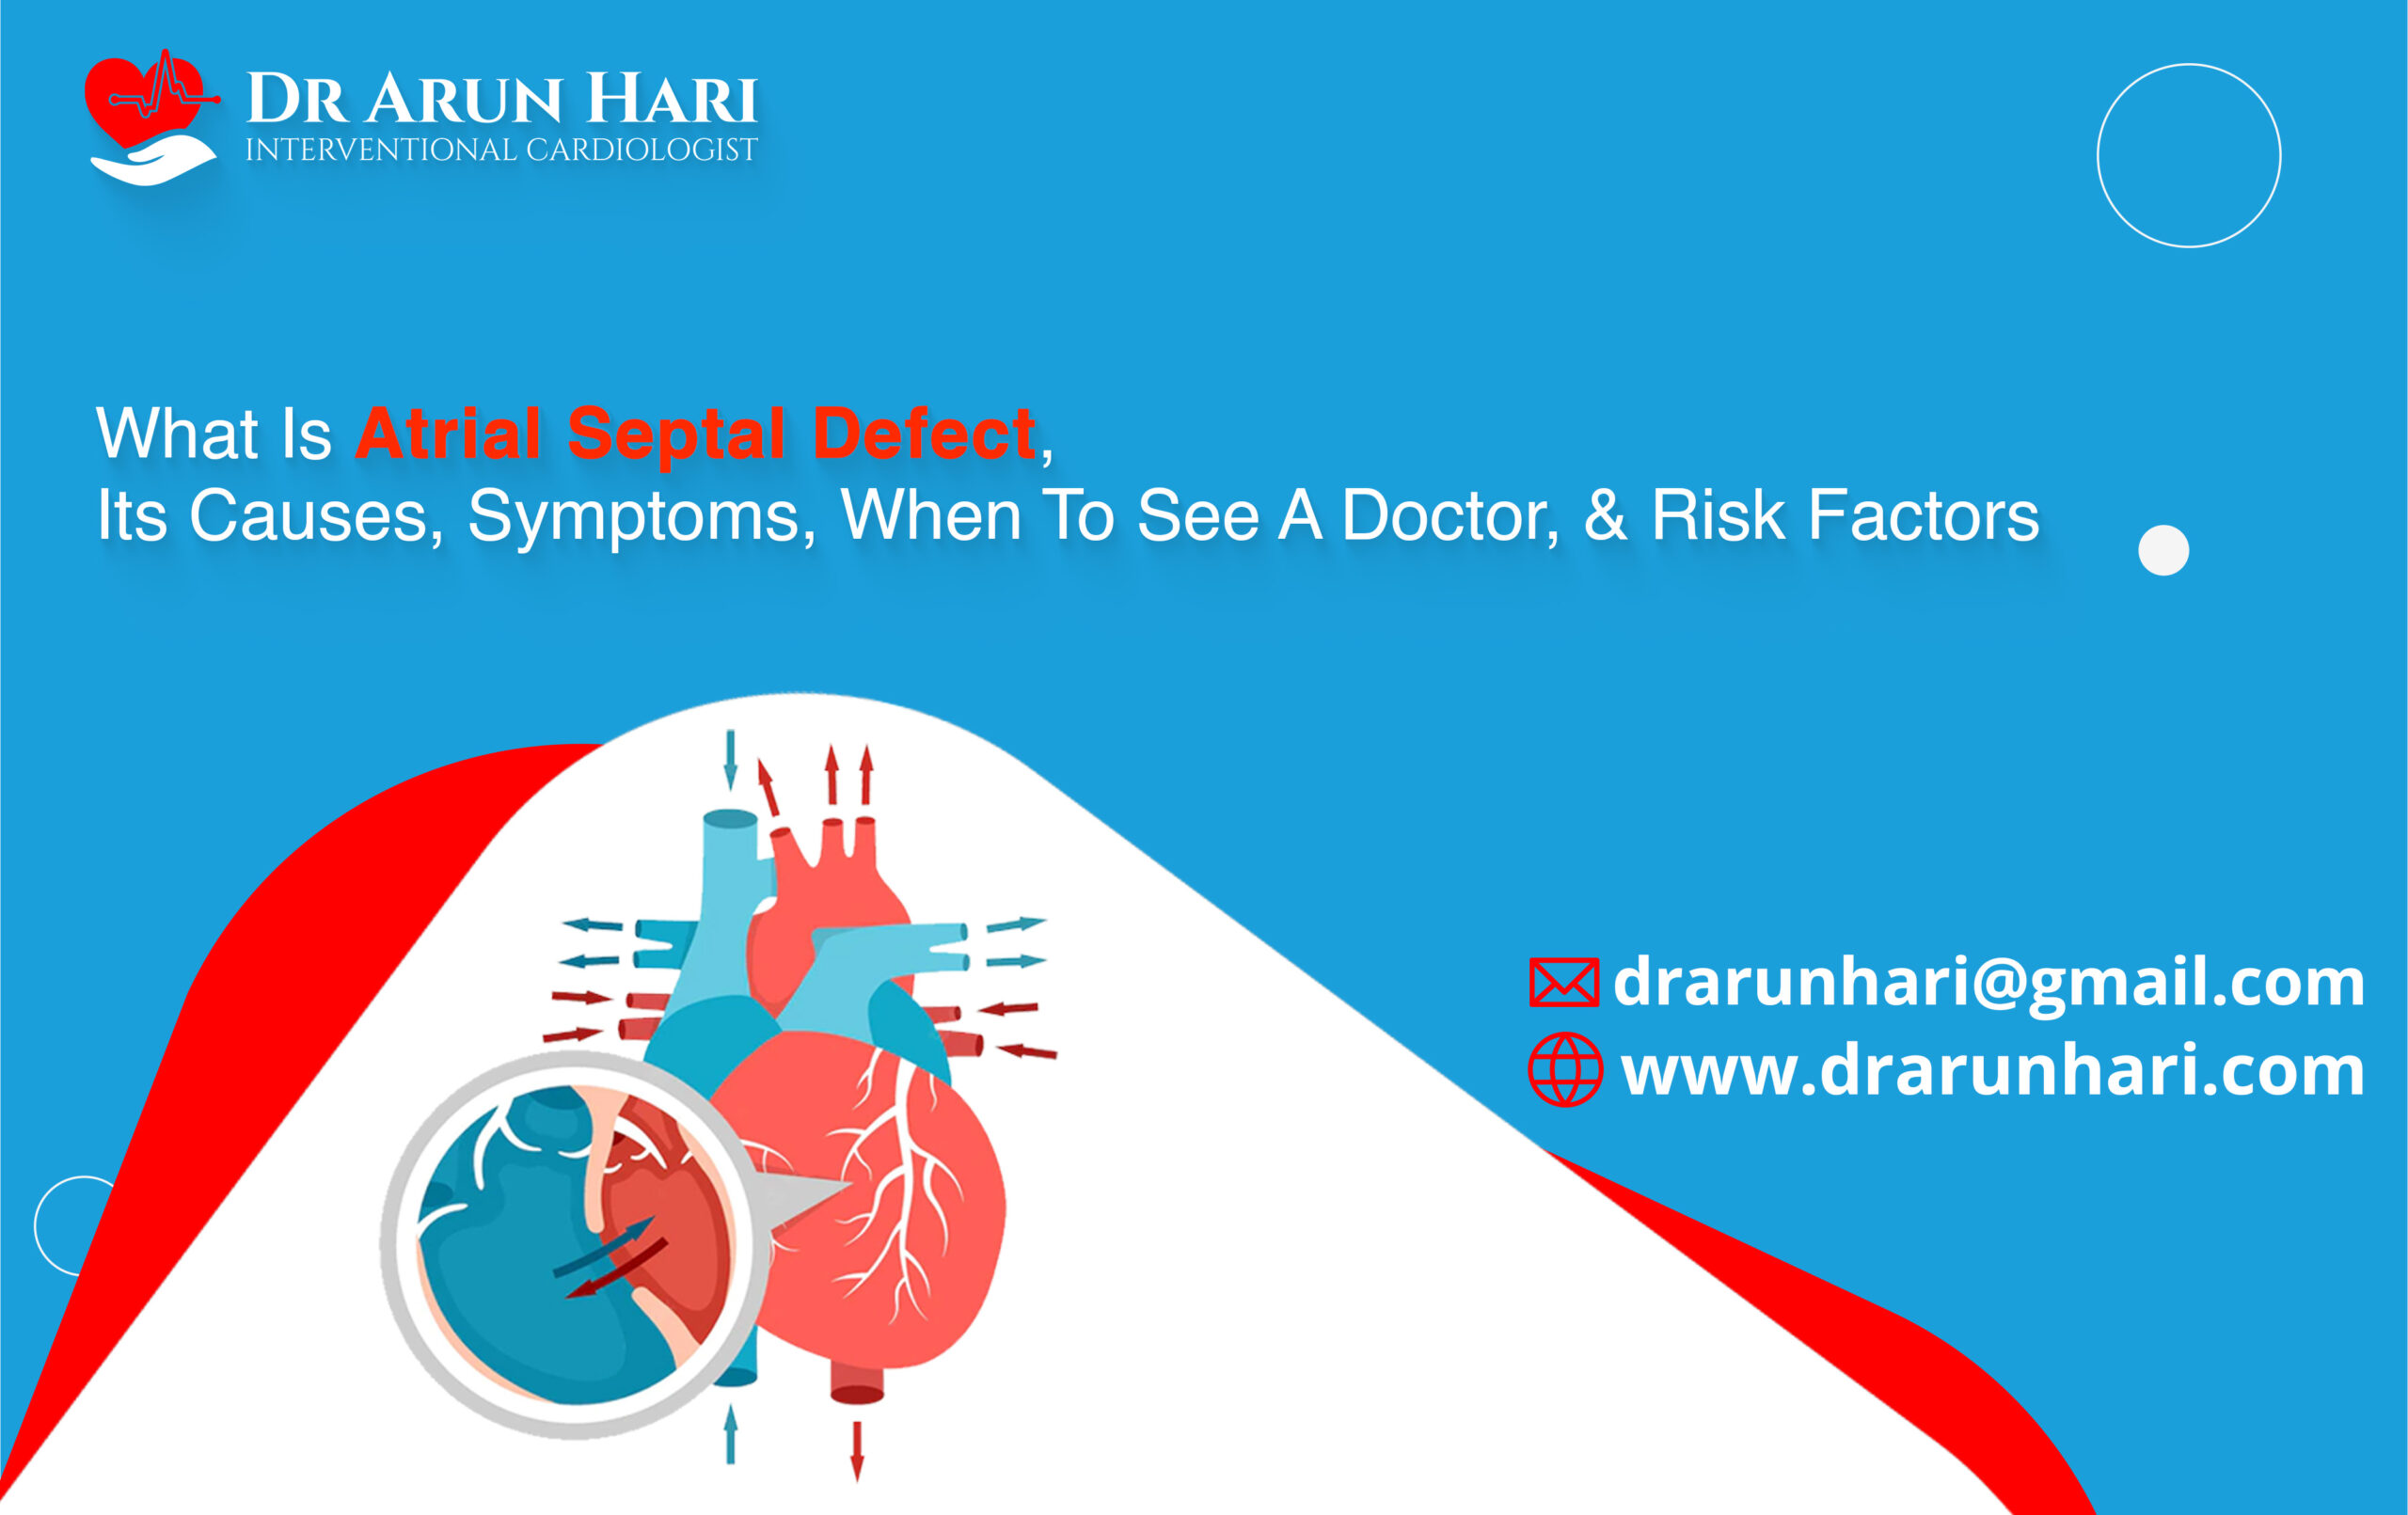 You are currently viewing Atrial Septal Defect, Its Causes, Symptoms, When To See A Doctor, & Risk Factors